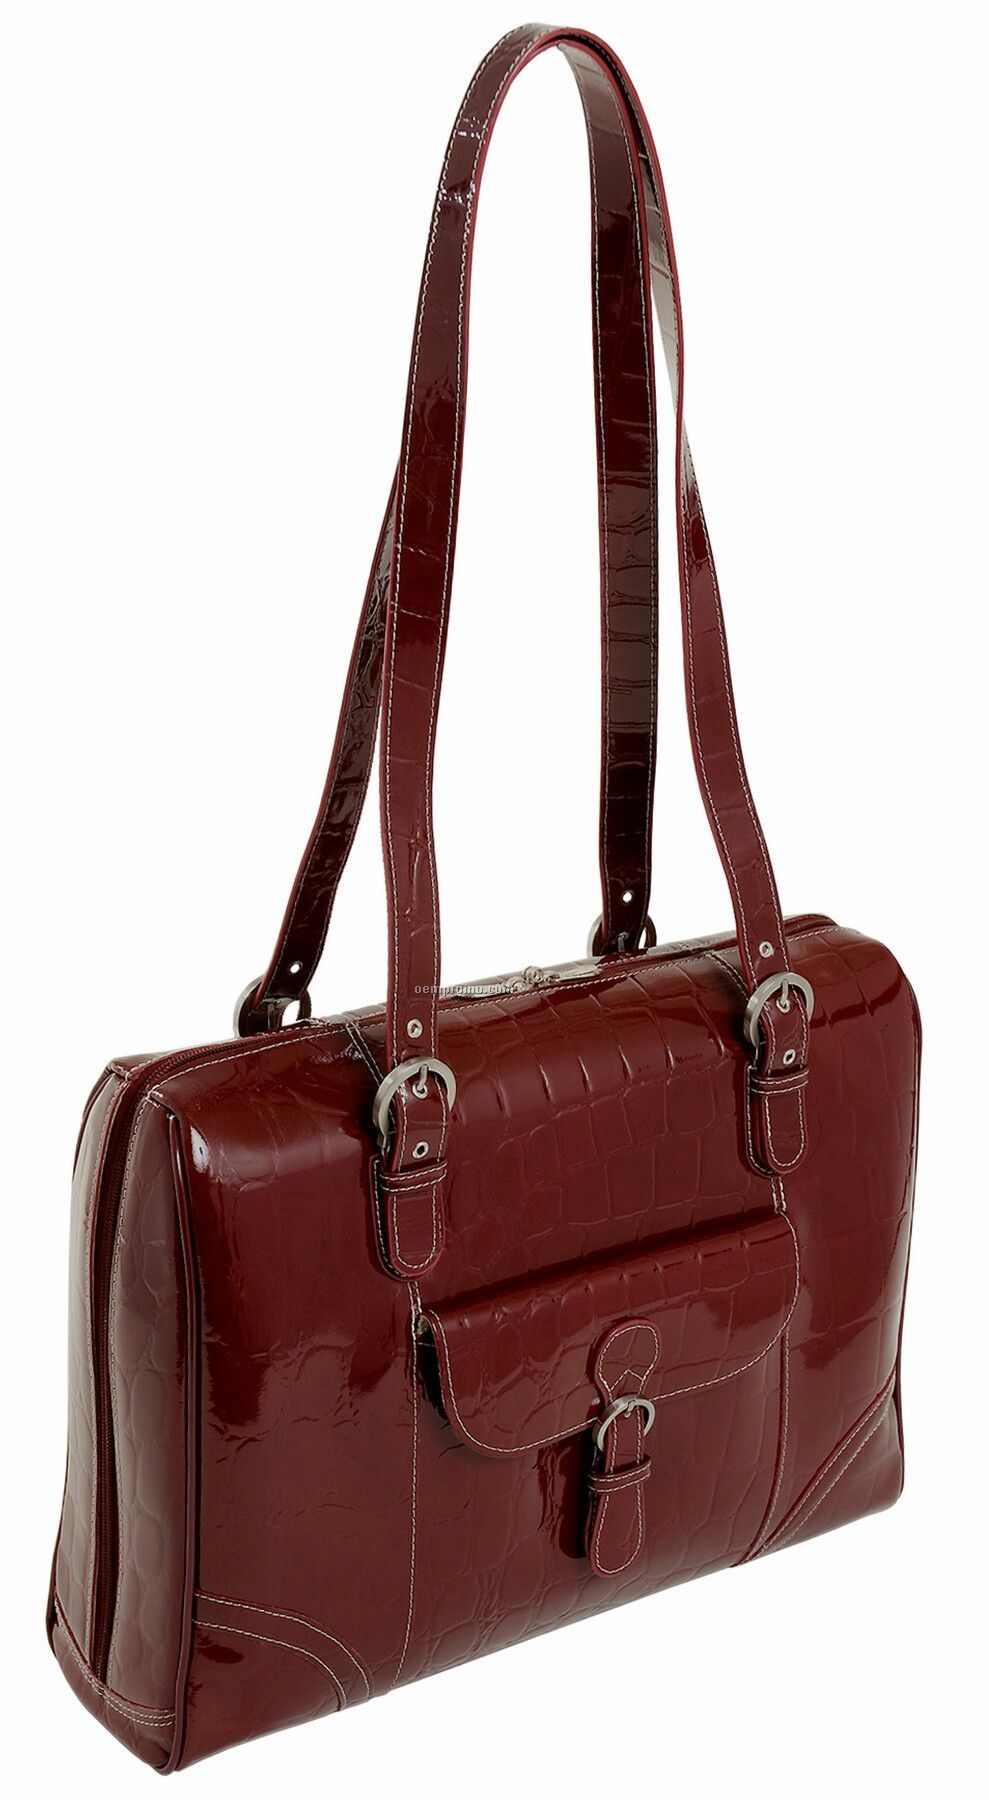 Molinelli Leather Ladies' Laptop Tote - Cherry Red